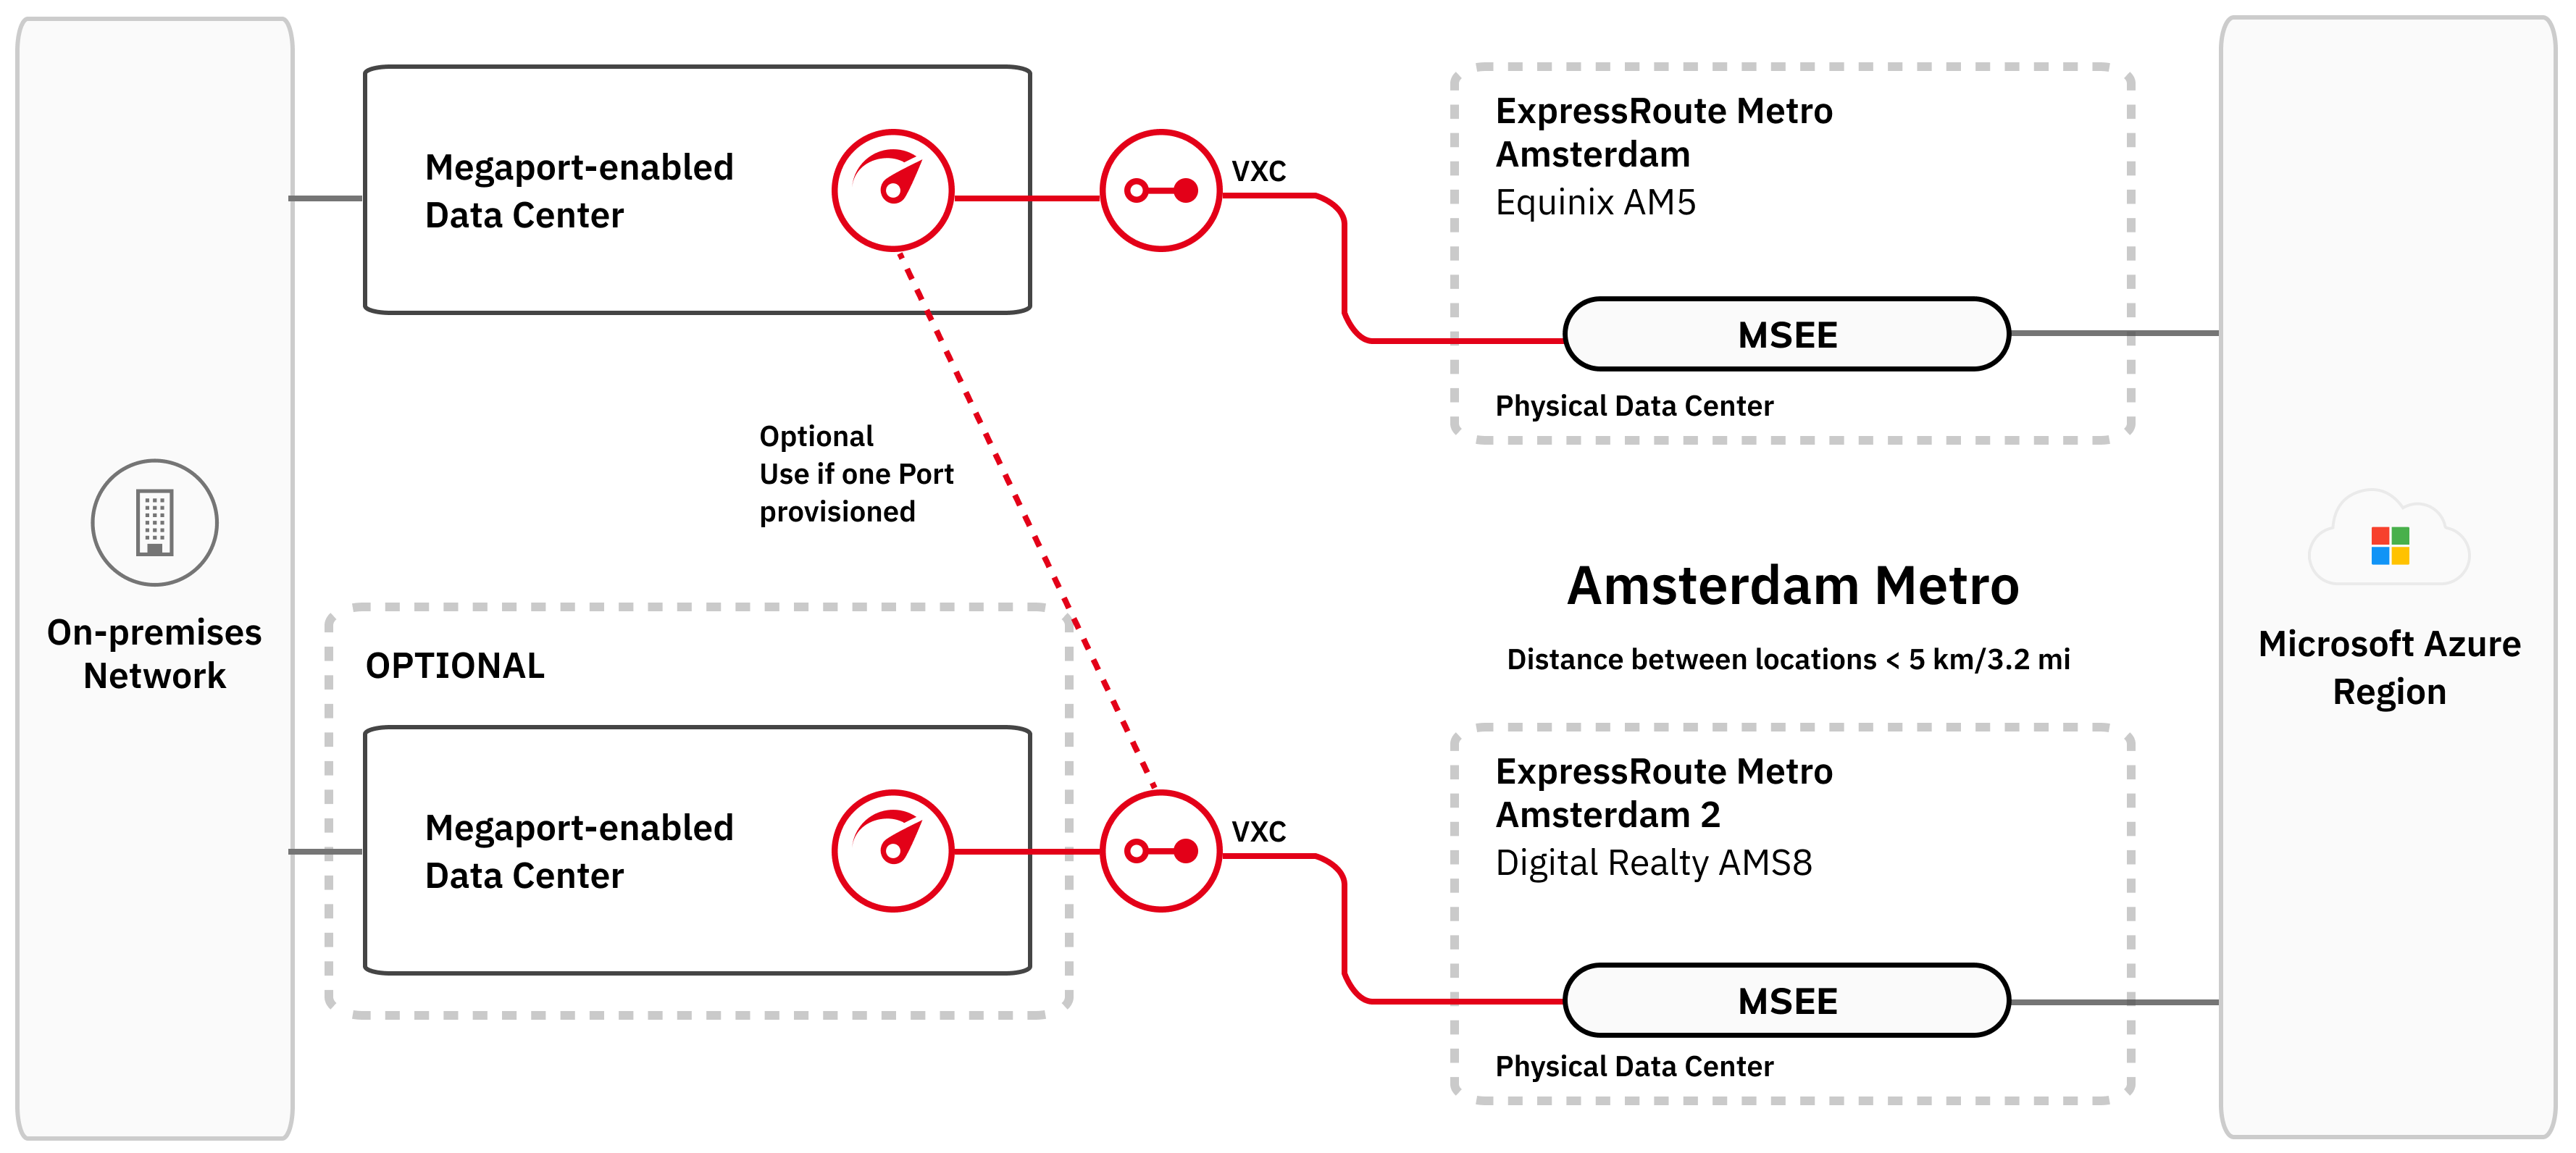 This image shows the structure of ExpressRoute high resiliency. On the left is the customer on-premises network. This is linked to one or two Ports in Megaport enabled data centers. These Ports are linked by VXC to MSEEs in two separate ExpressRoute Metro peering locations within the same metropolitan area. The ExpressRoute Metro peering locations are less than 5kms/3.2 miles apart. Each ExpressRoute Metro peering location has two MSEEs. The ExpressRoute Metro configuration hasEach of the two Ports is linked to an MSEE by a VXC.